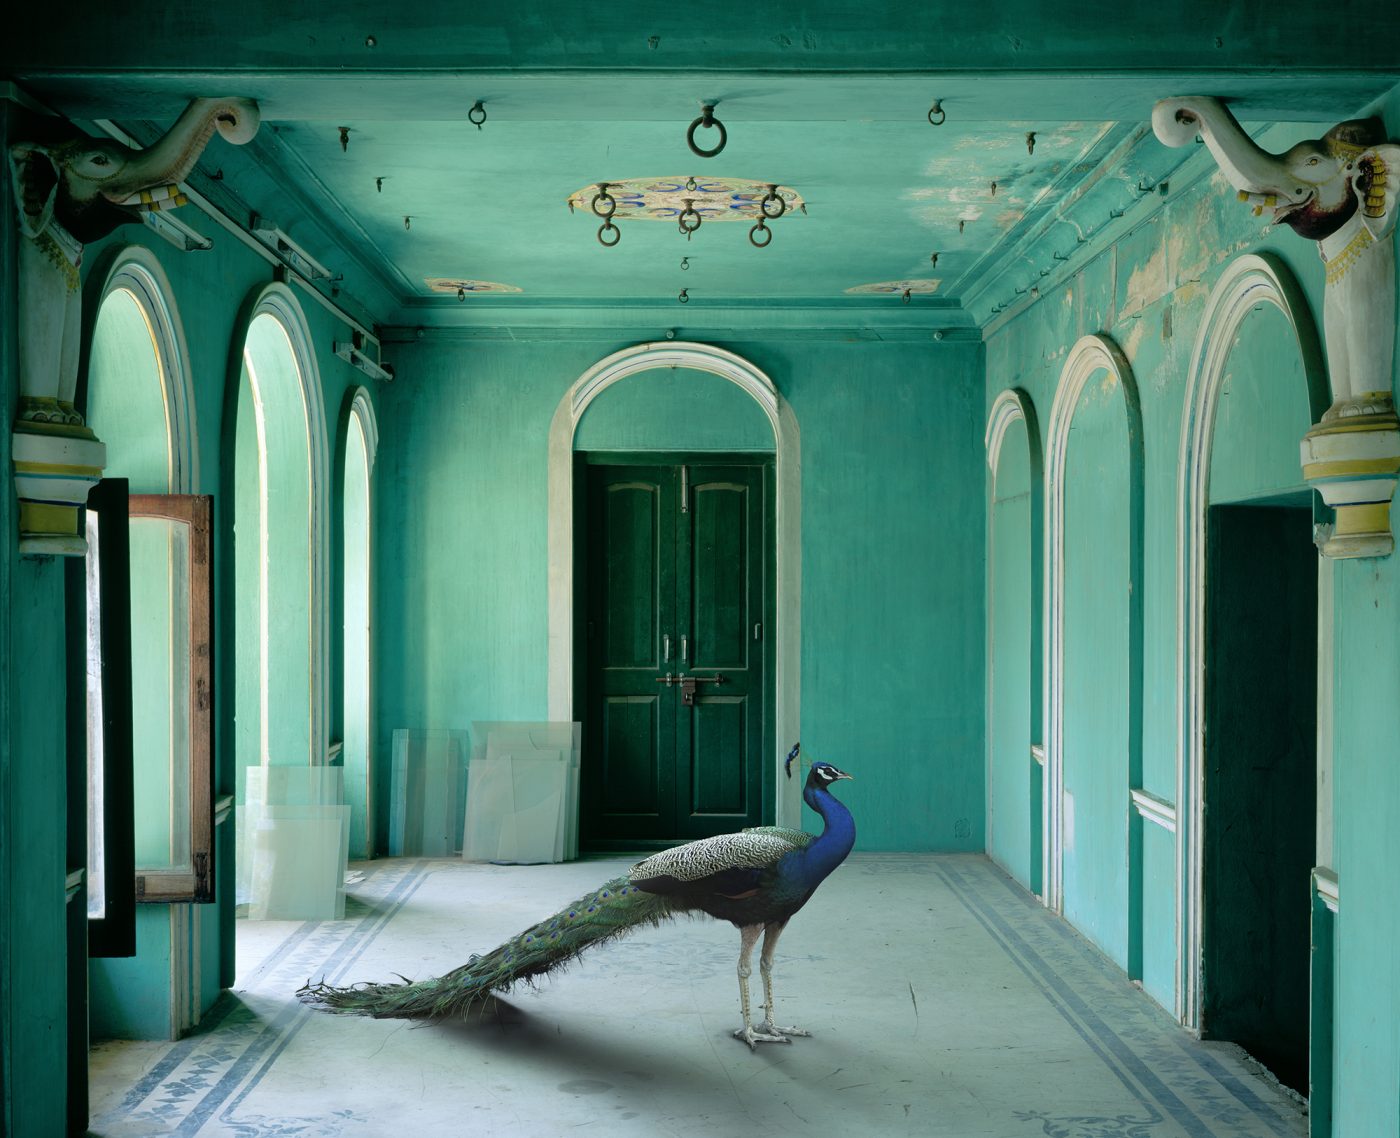 The Queen’s Room, Zanana, Udaipur City Palace, 2010, by Karen Knorr